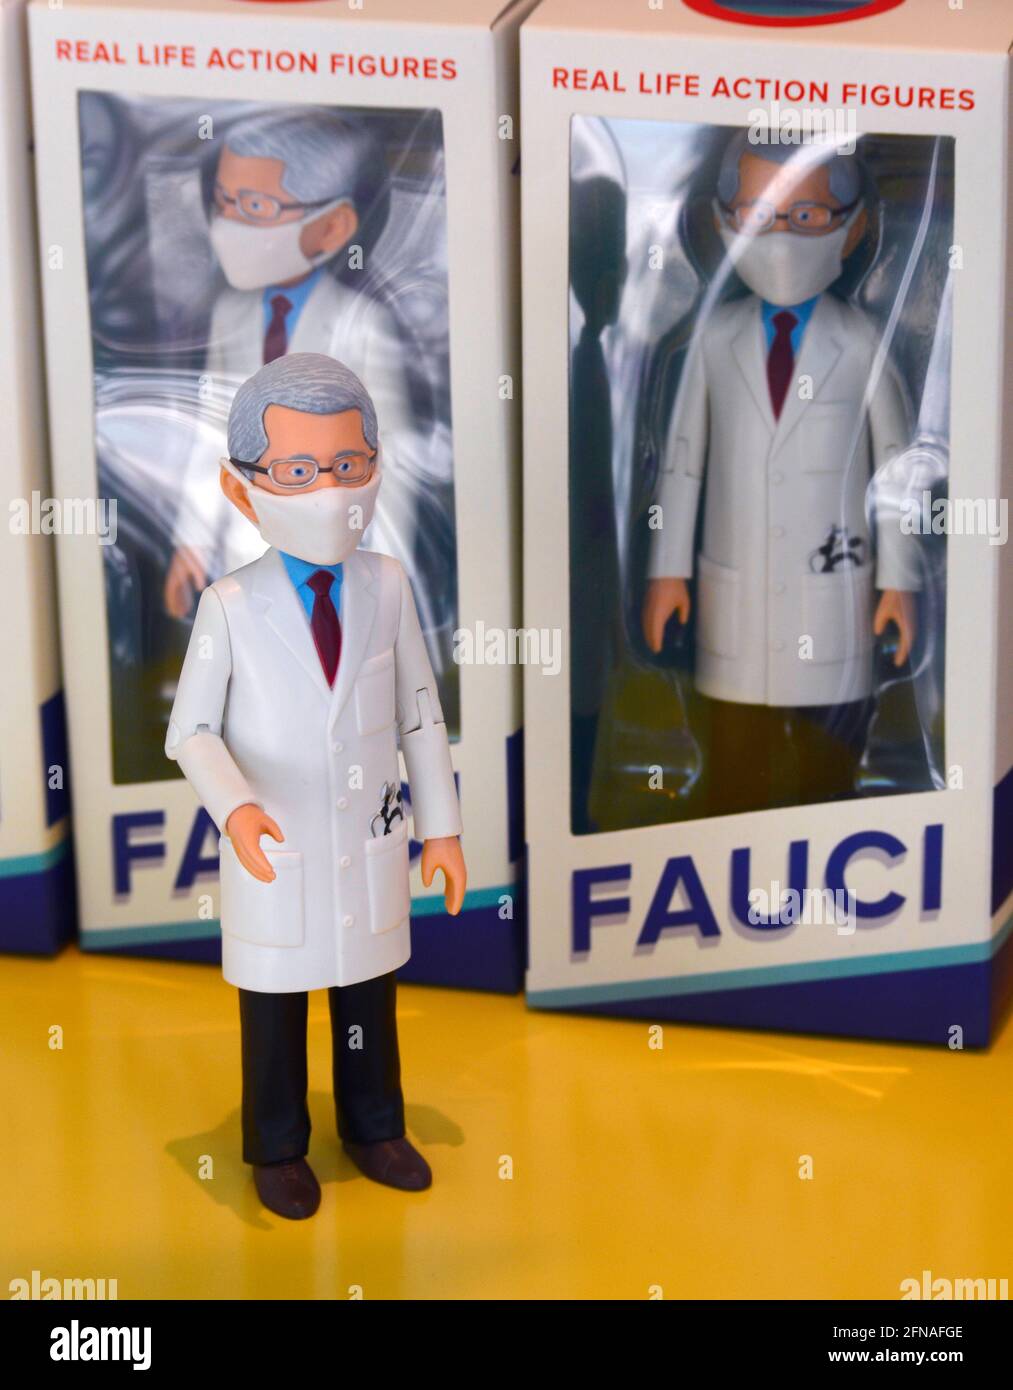 Action figure dolls Dr. Anthony Fauci, director of the U.S. National Institute of Allergy and Infectious Diseases and medical advisor to the President. Stock Photo